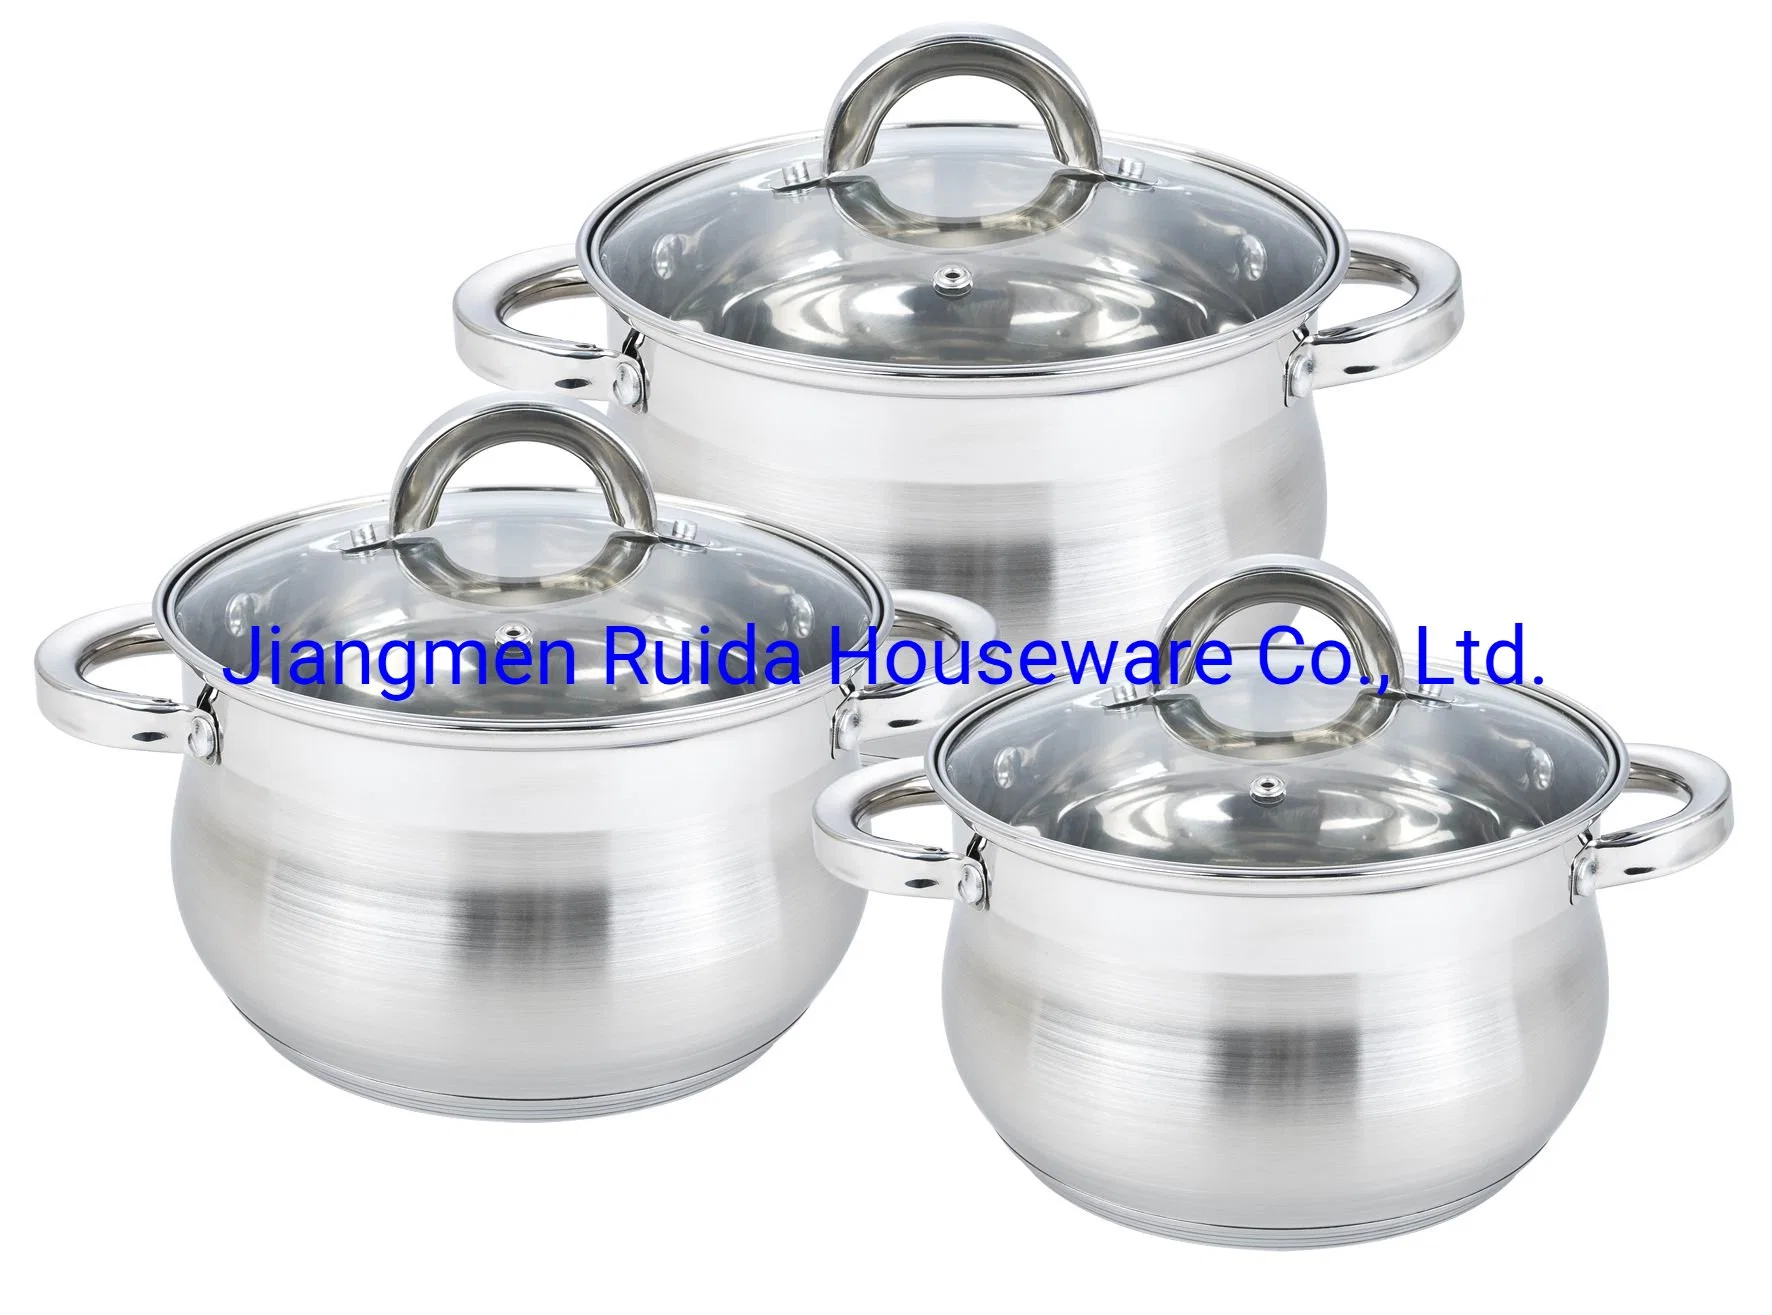 New Arrival in Fashion Glass Lid Big Belly Stainless Steel Kitchenware Set Wholesale Full Size